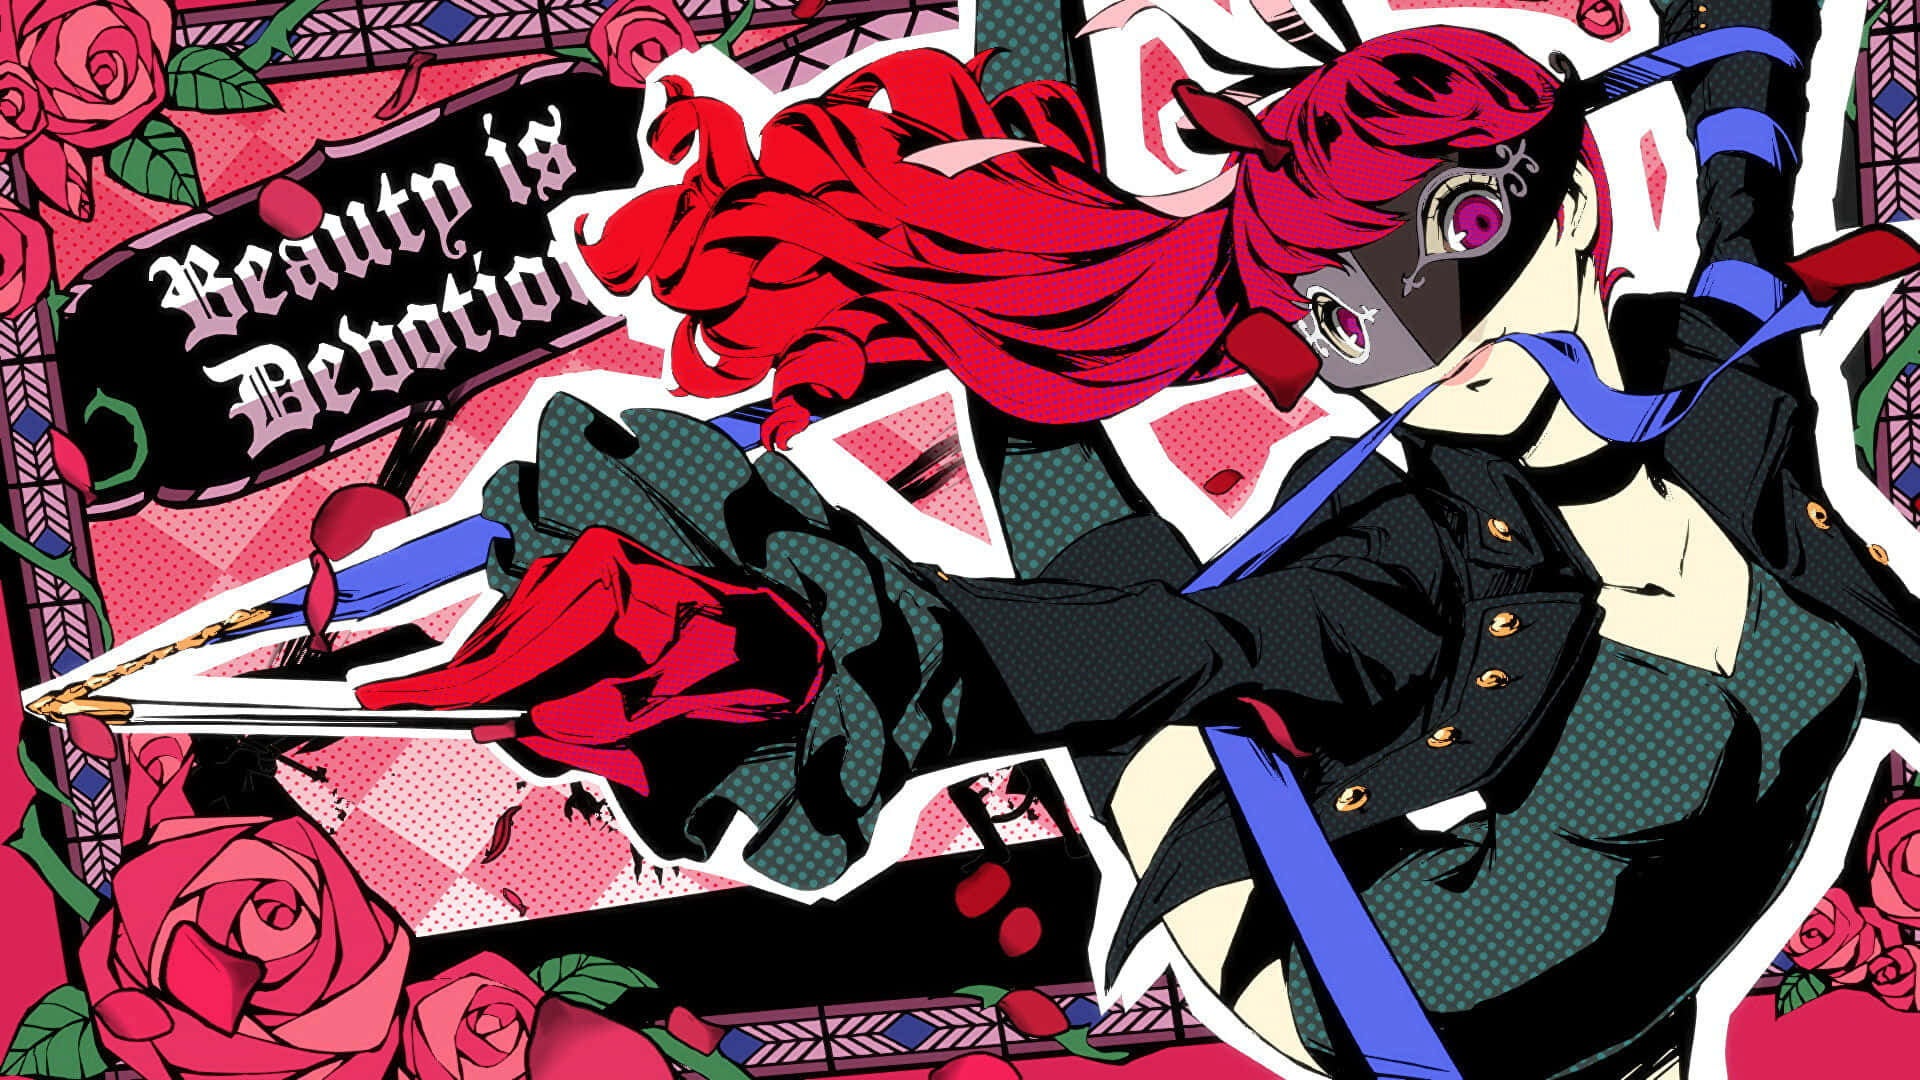 Step outside of your comfort zone and join the Phantom Thieves!